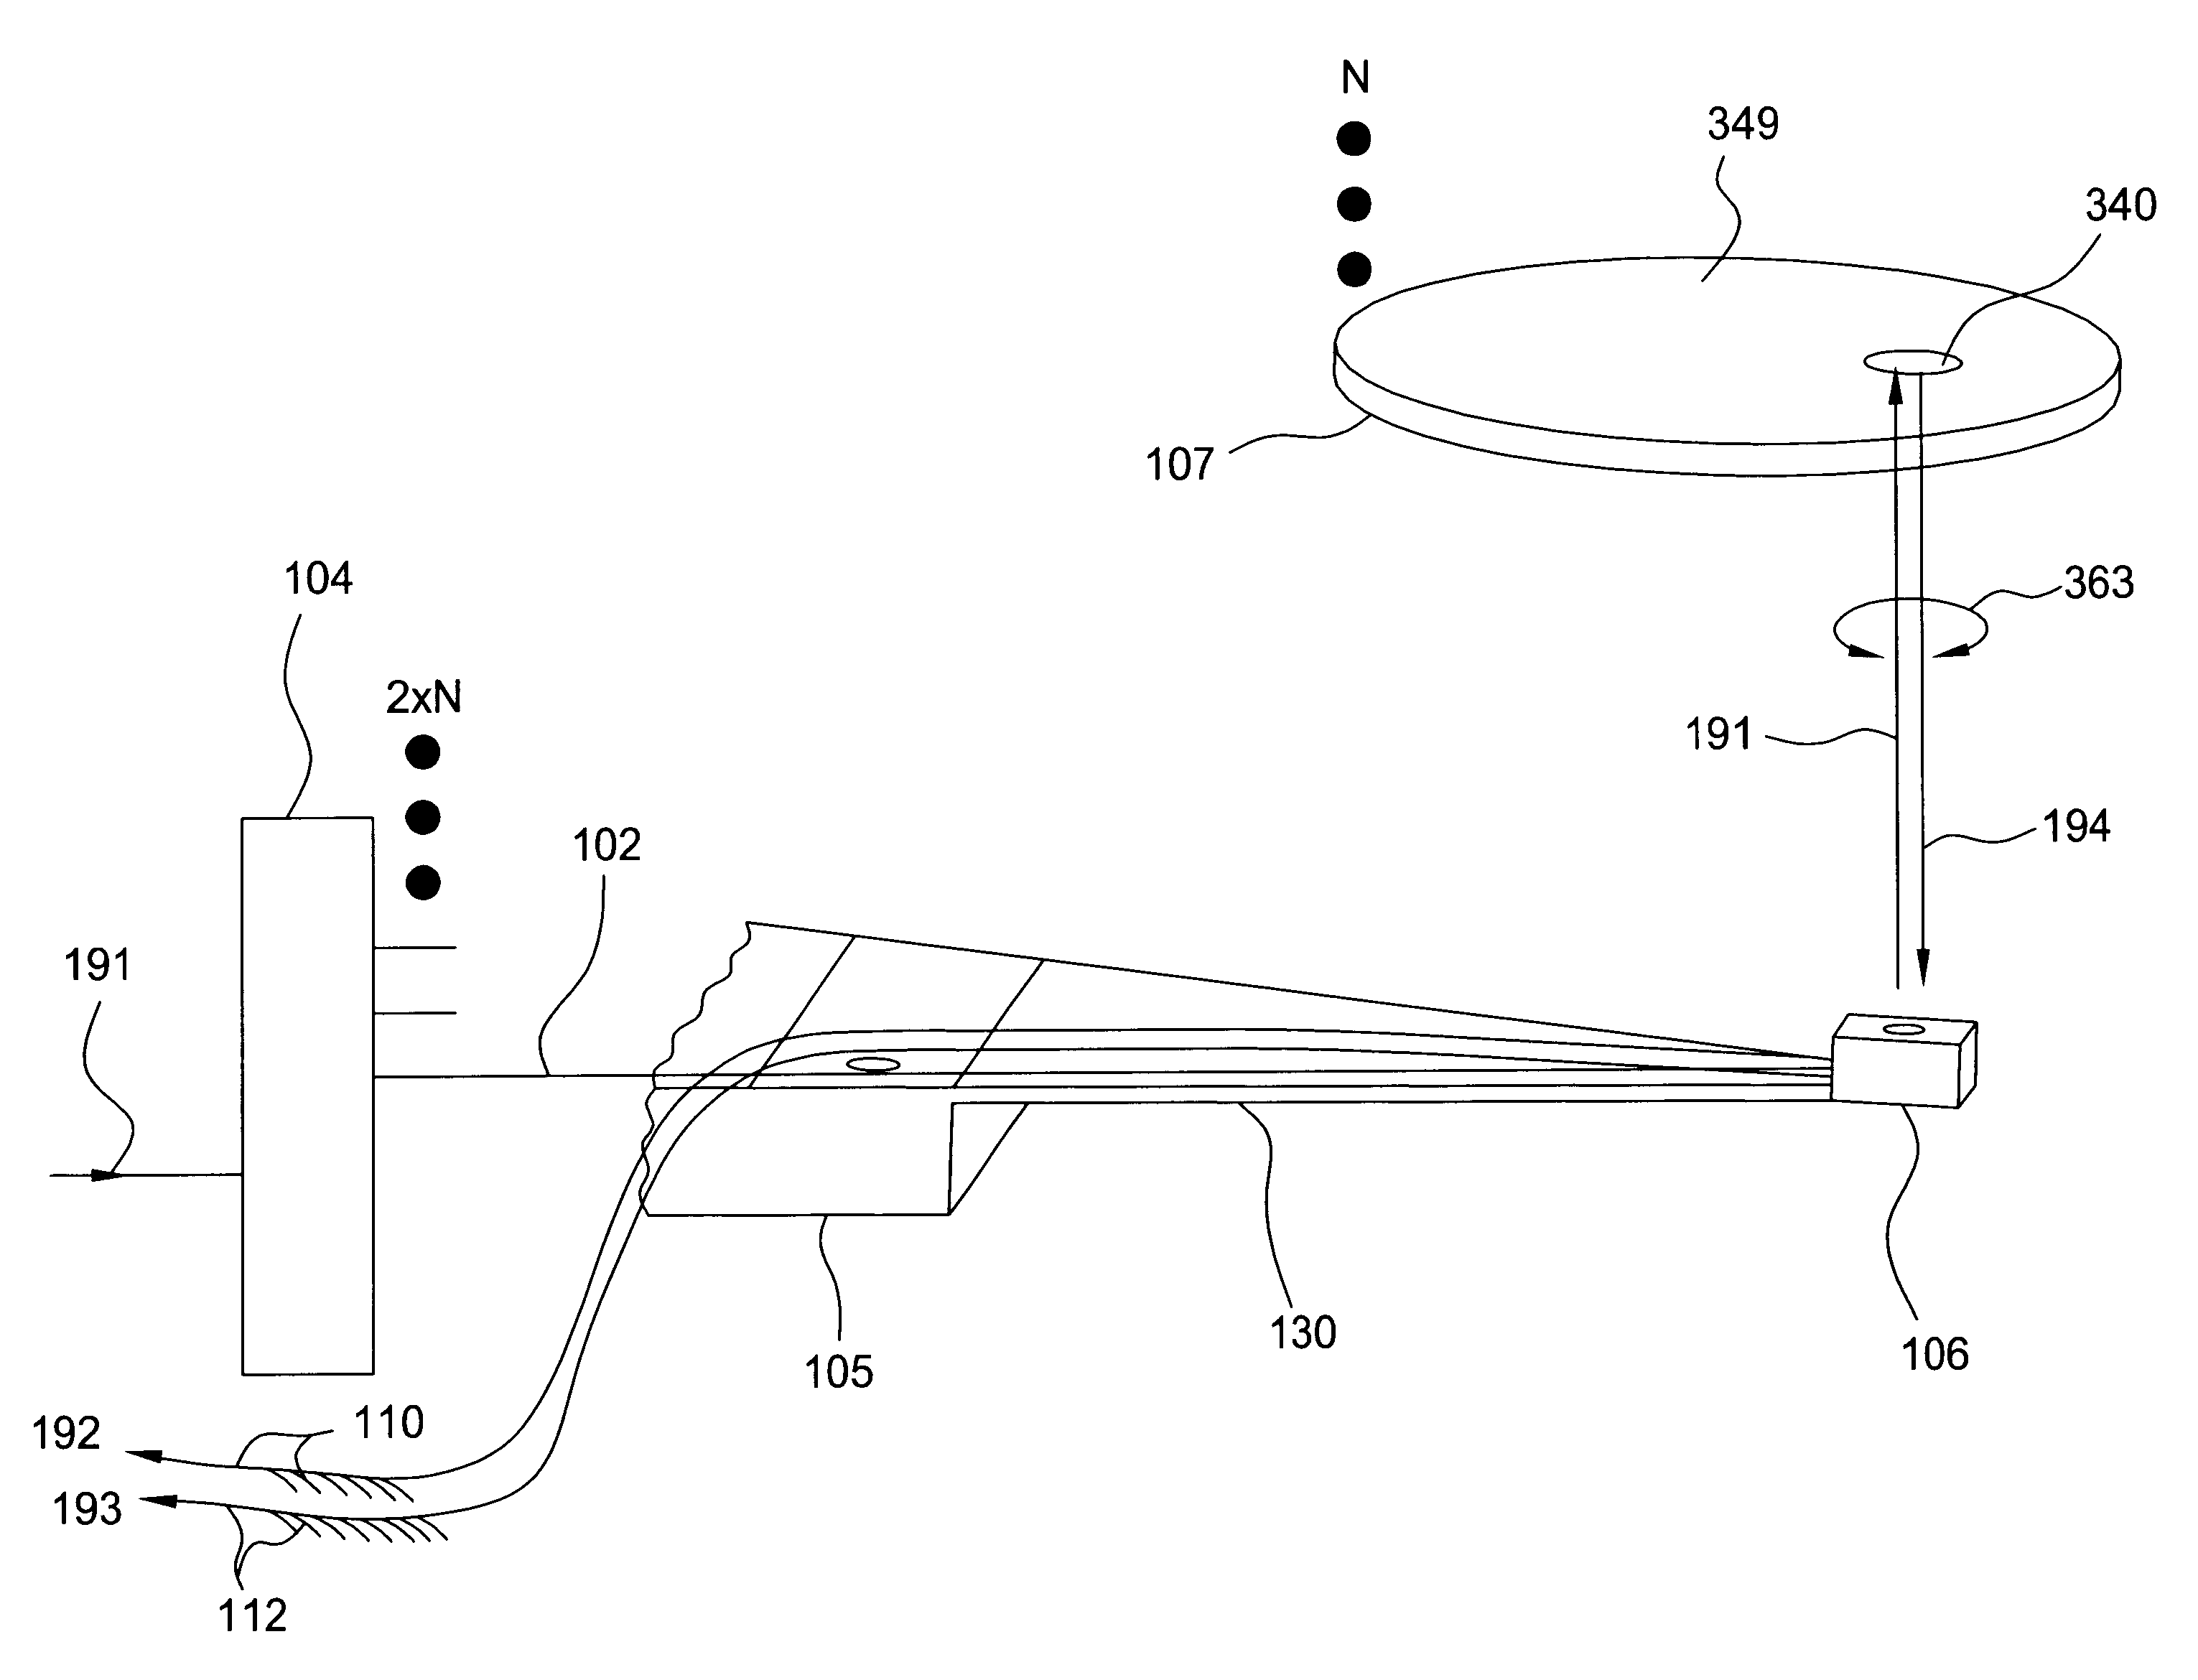 Data storage system having an optical processing flying head